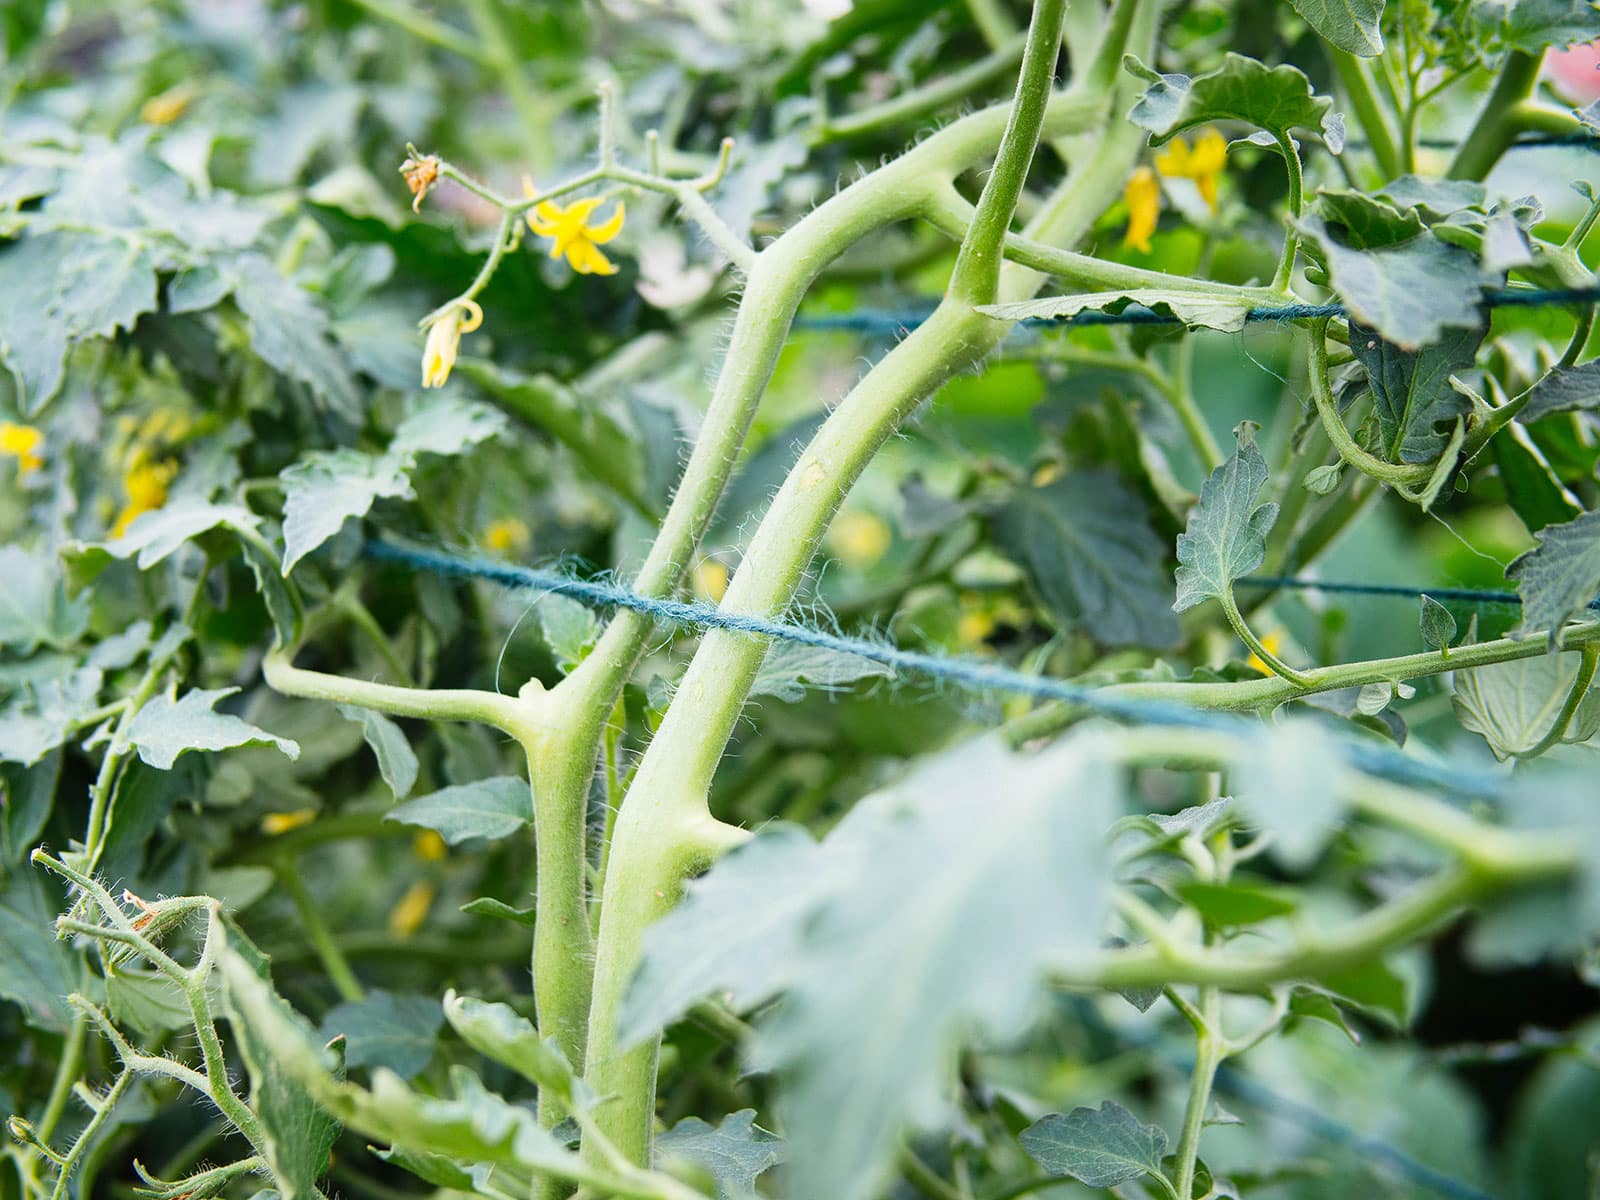 Close-up of green hemp cord supporting tomato vines